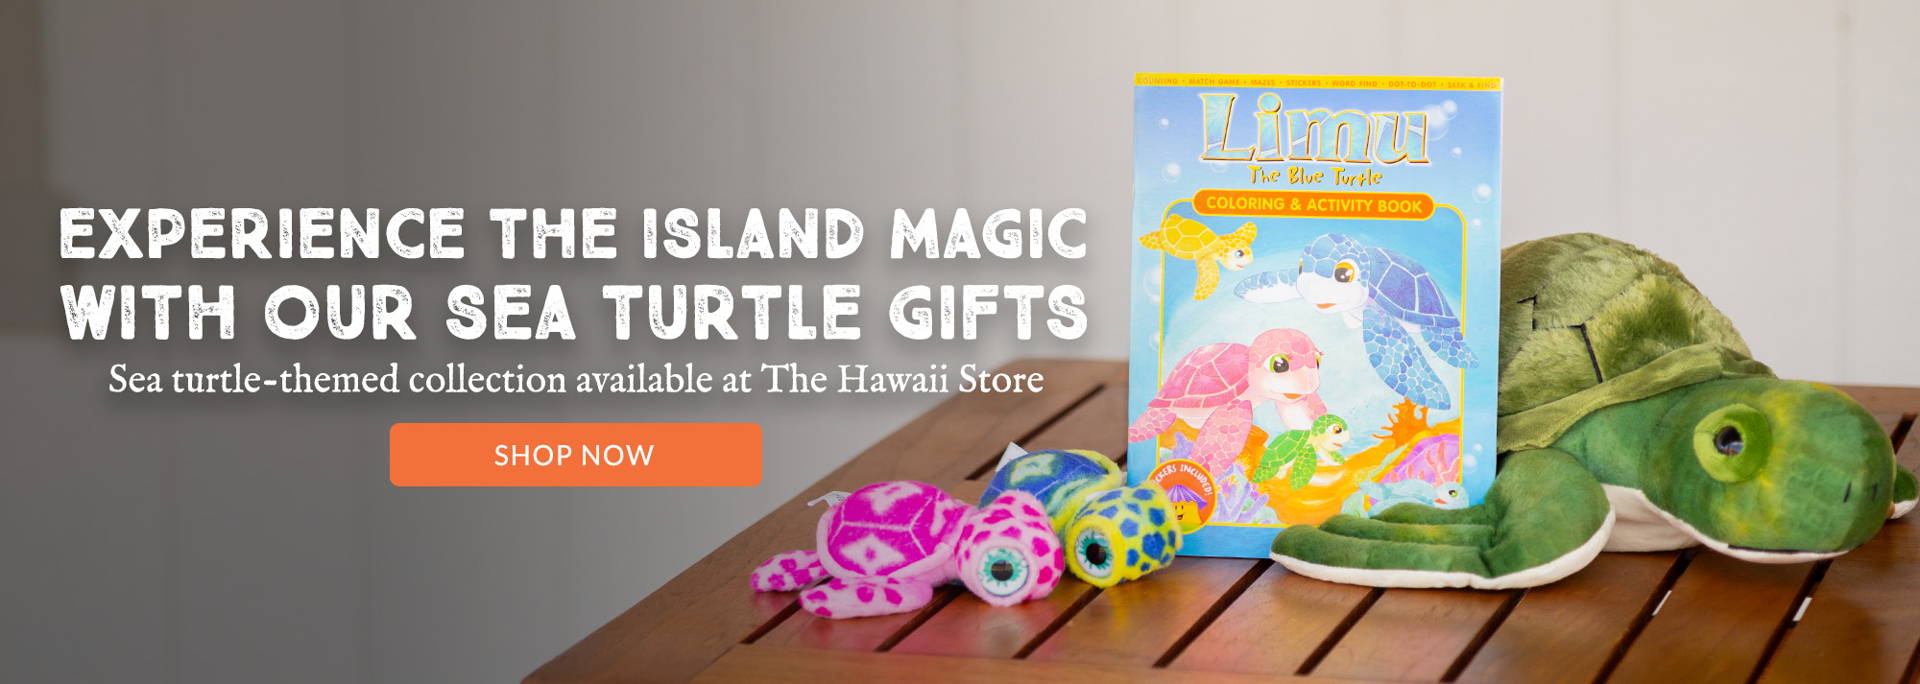 Experience the island magic with our sea turtle gifts. Sea turtle-themed collection available at the Hawaii store!